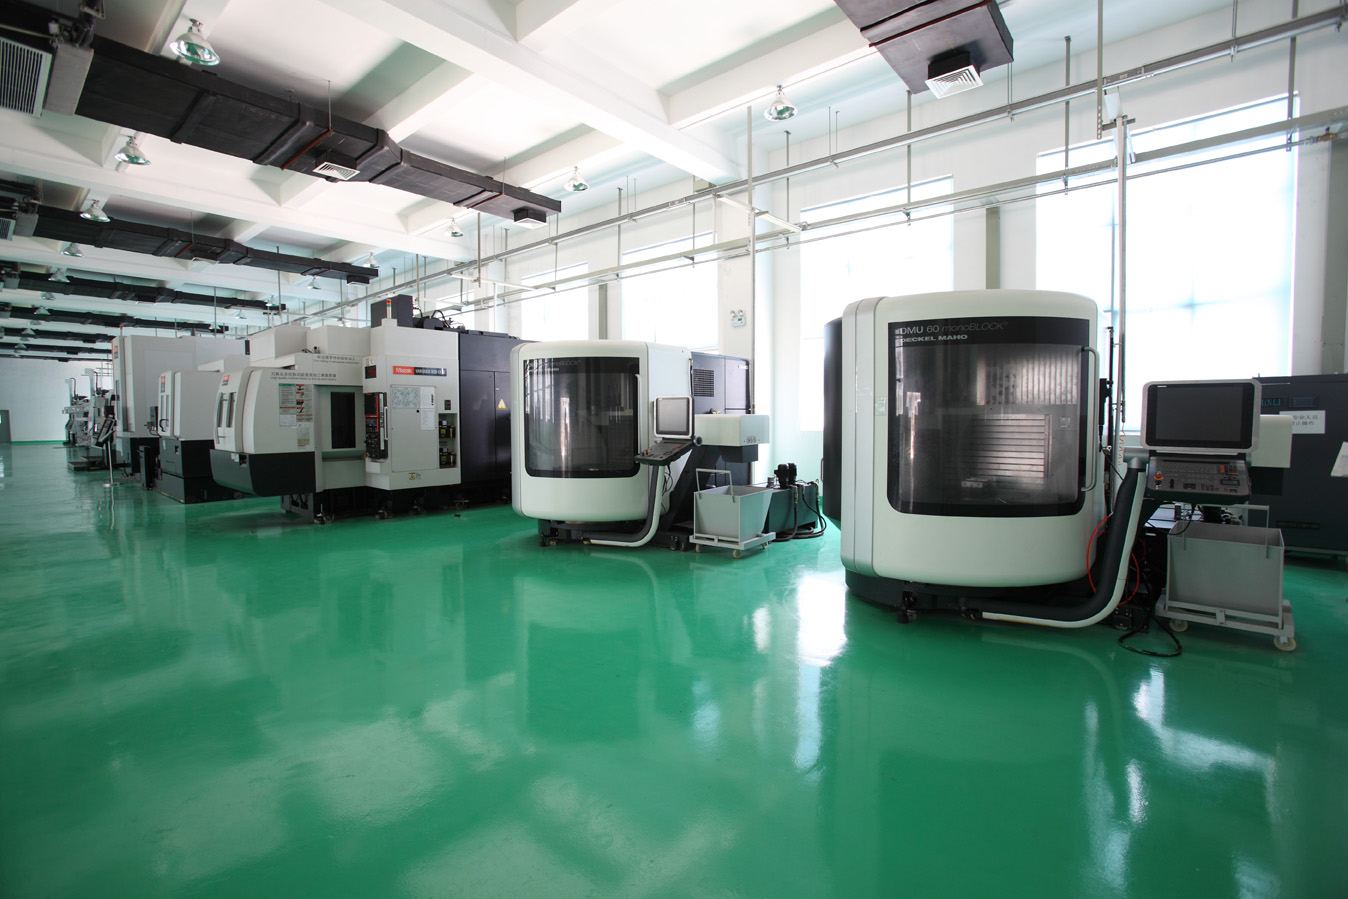 WIDE PLUS, Fujian Province in 2014 to undertake a major science and technology project in Fujian province, “High-end instrument valves and fittings key technology research and development and industrialization.”